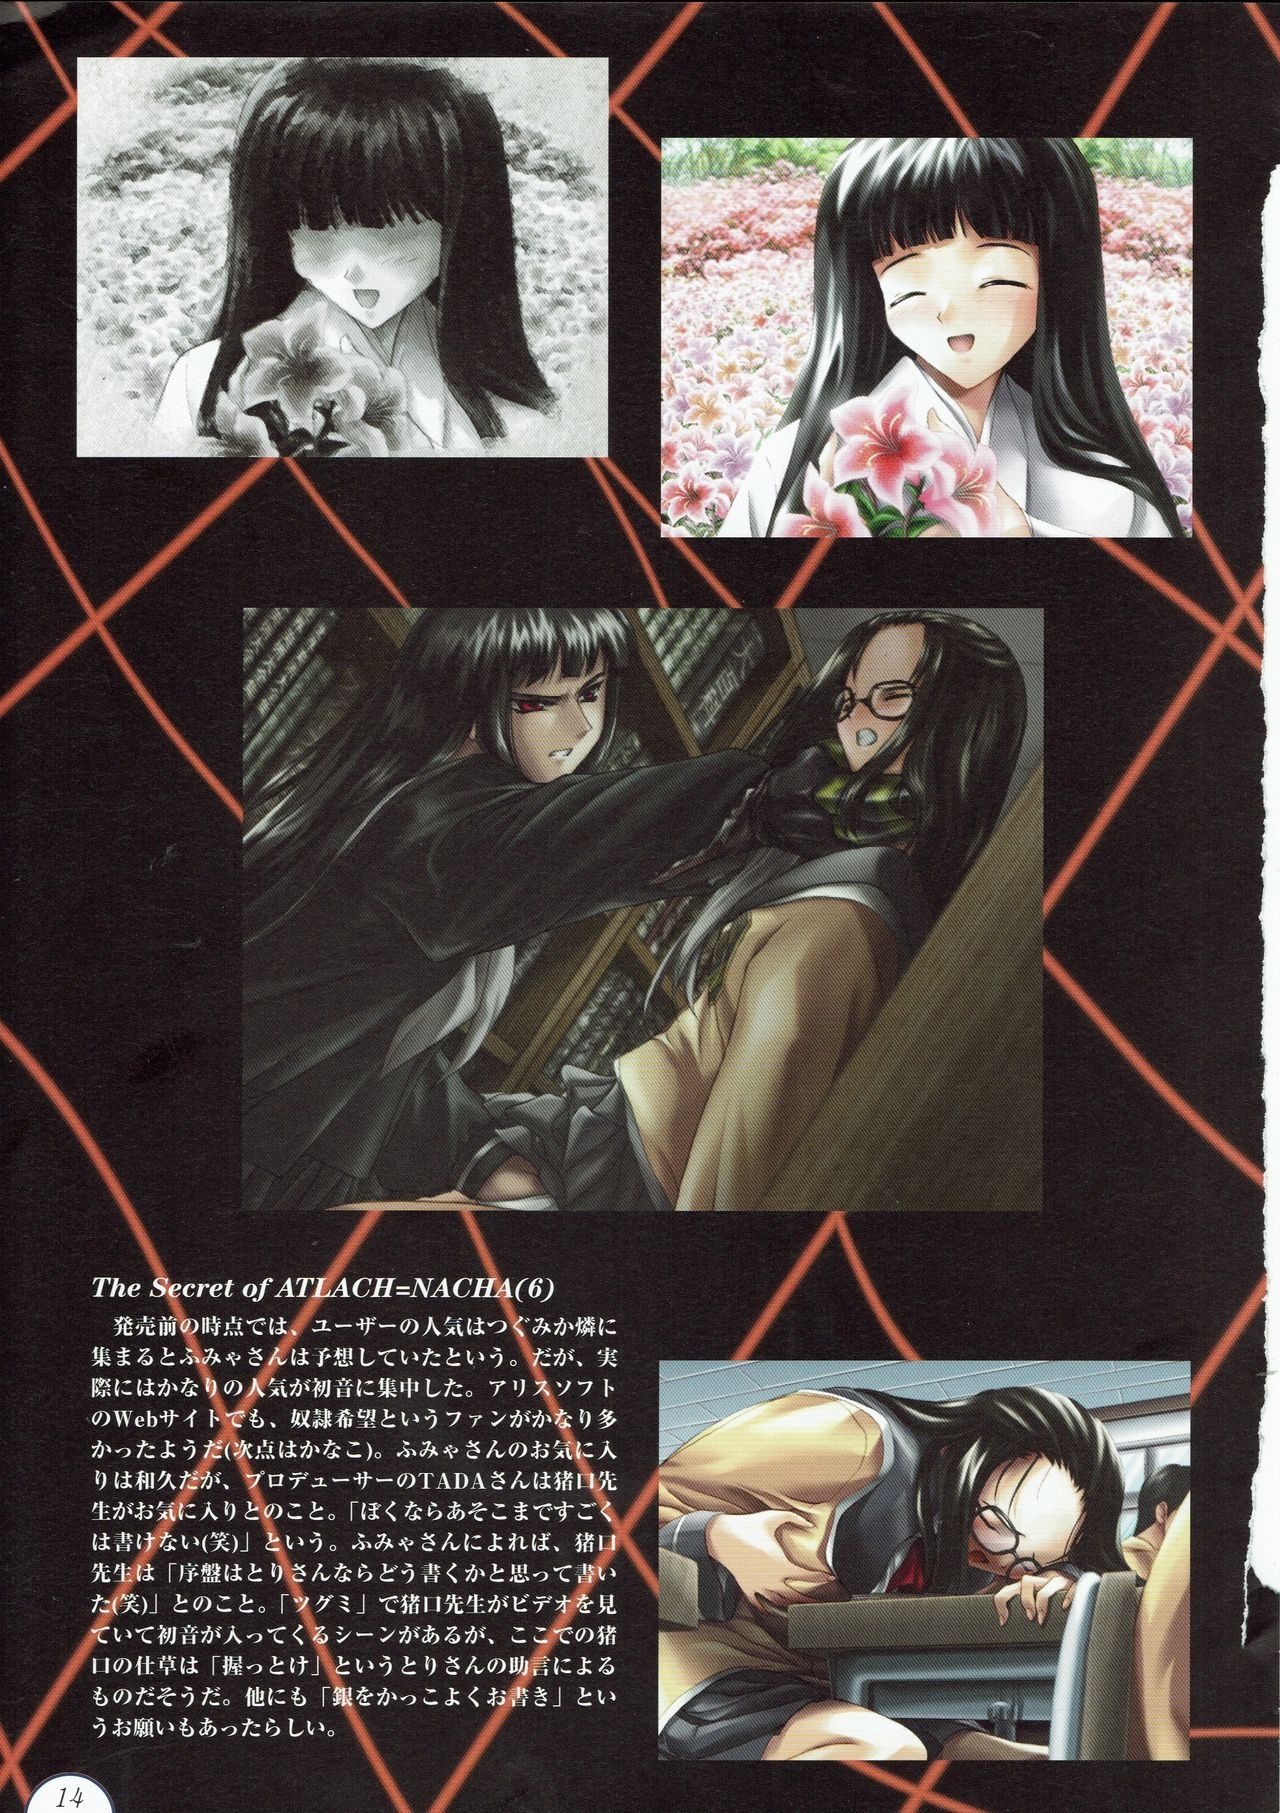 Alice no Yakata 456 Official Guide 15